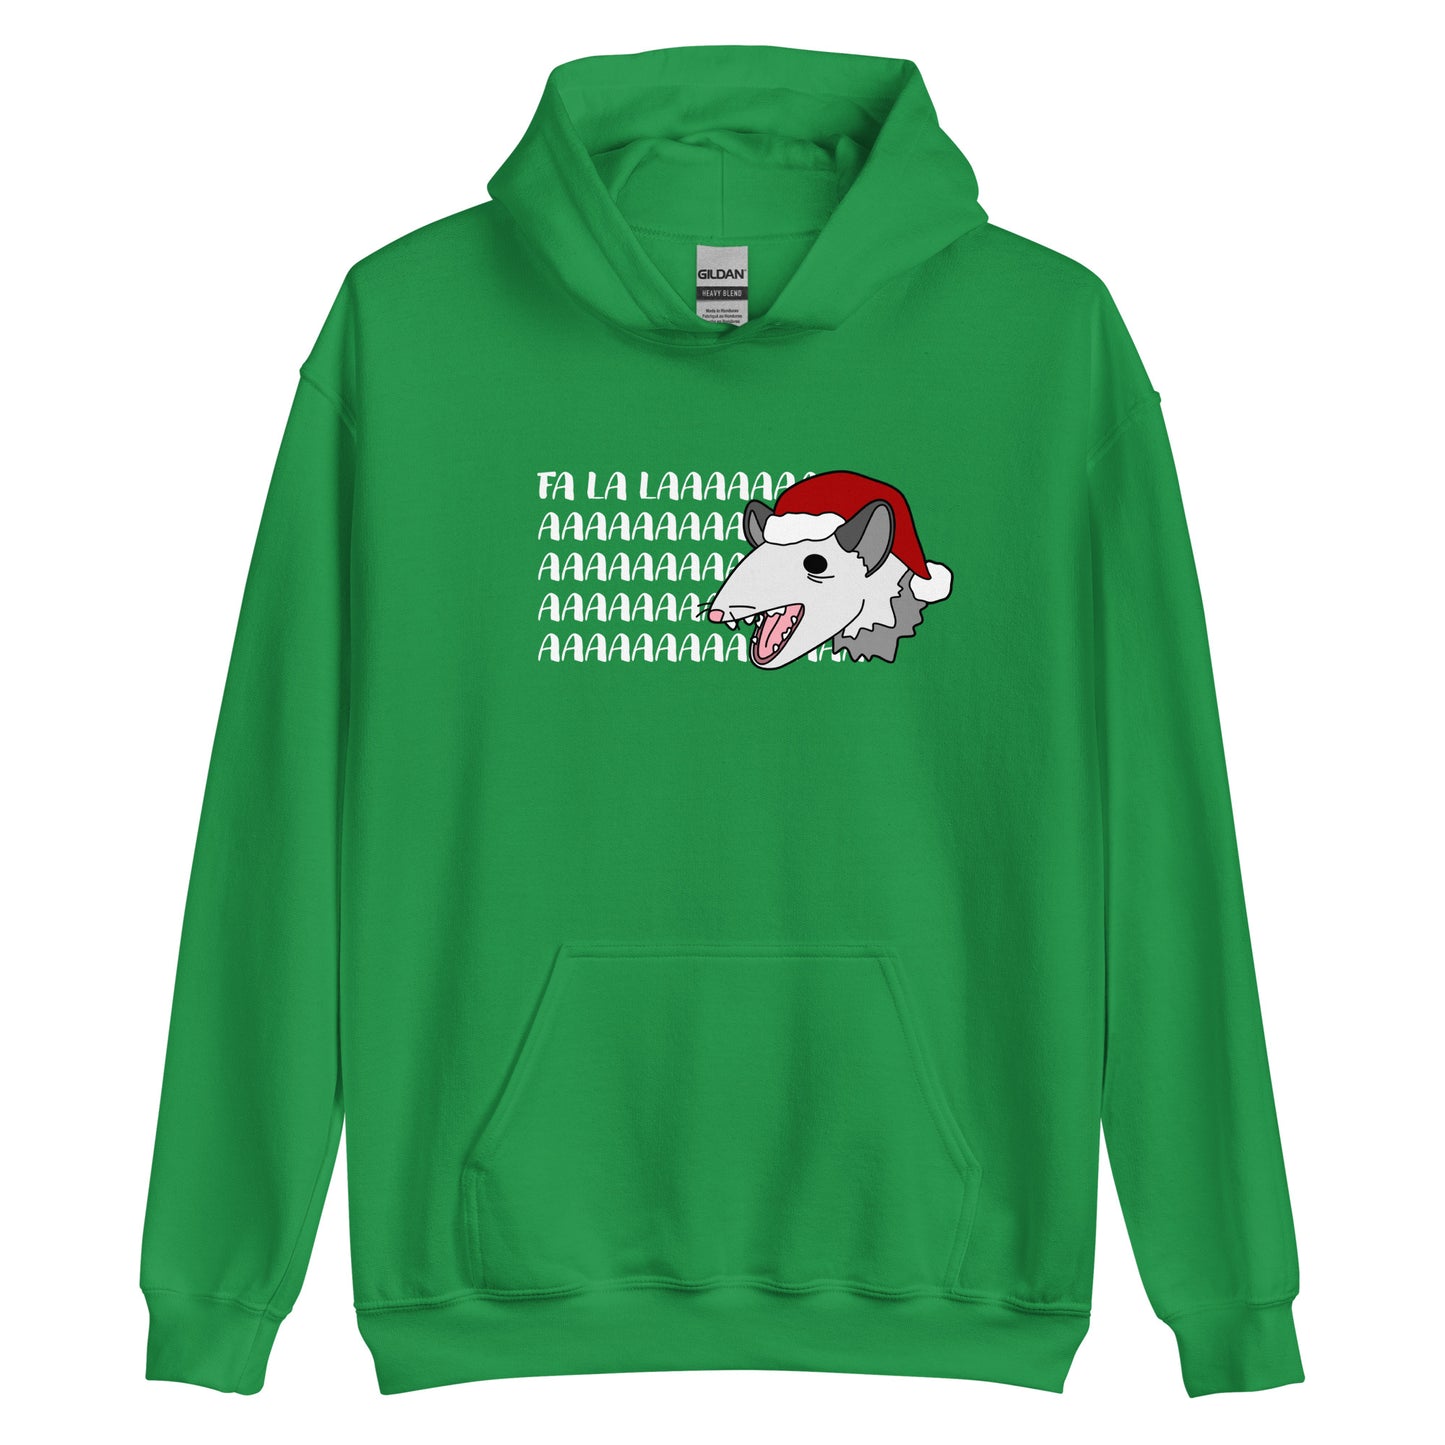 A green hooded sweatshirt featuring an illustration of a possum wearing a Santa hat. The possum appears to be screaming, and text behind his head reads "FA LA LAAAAAA"